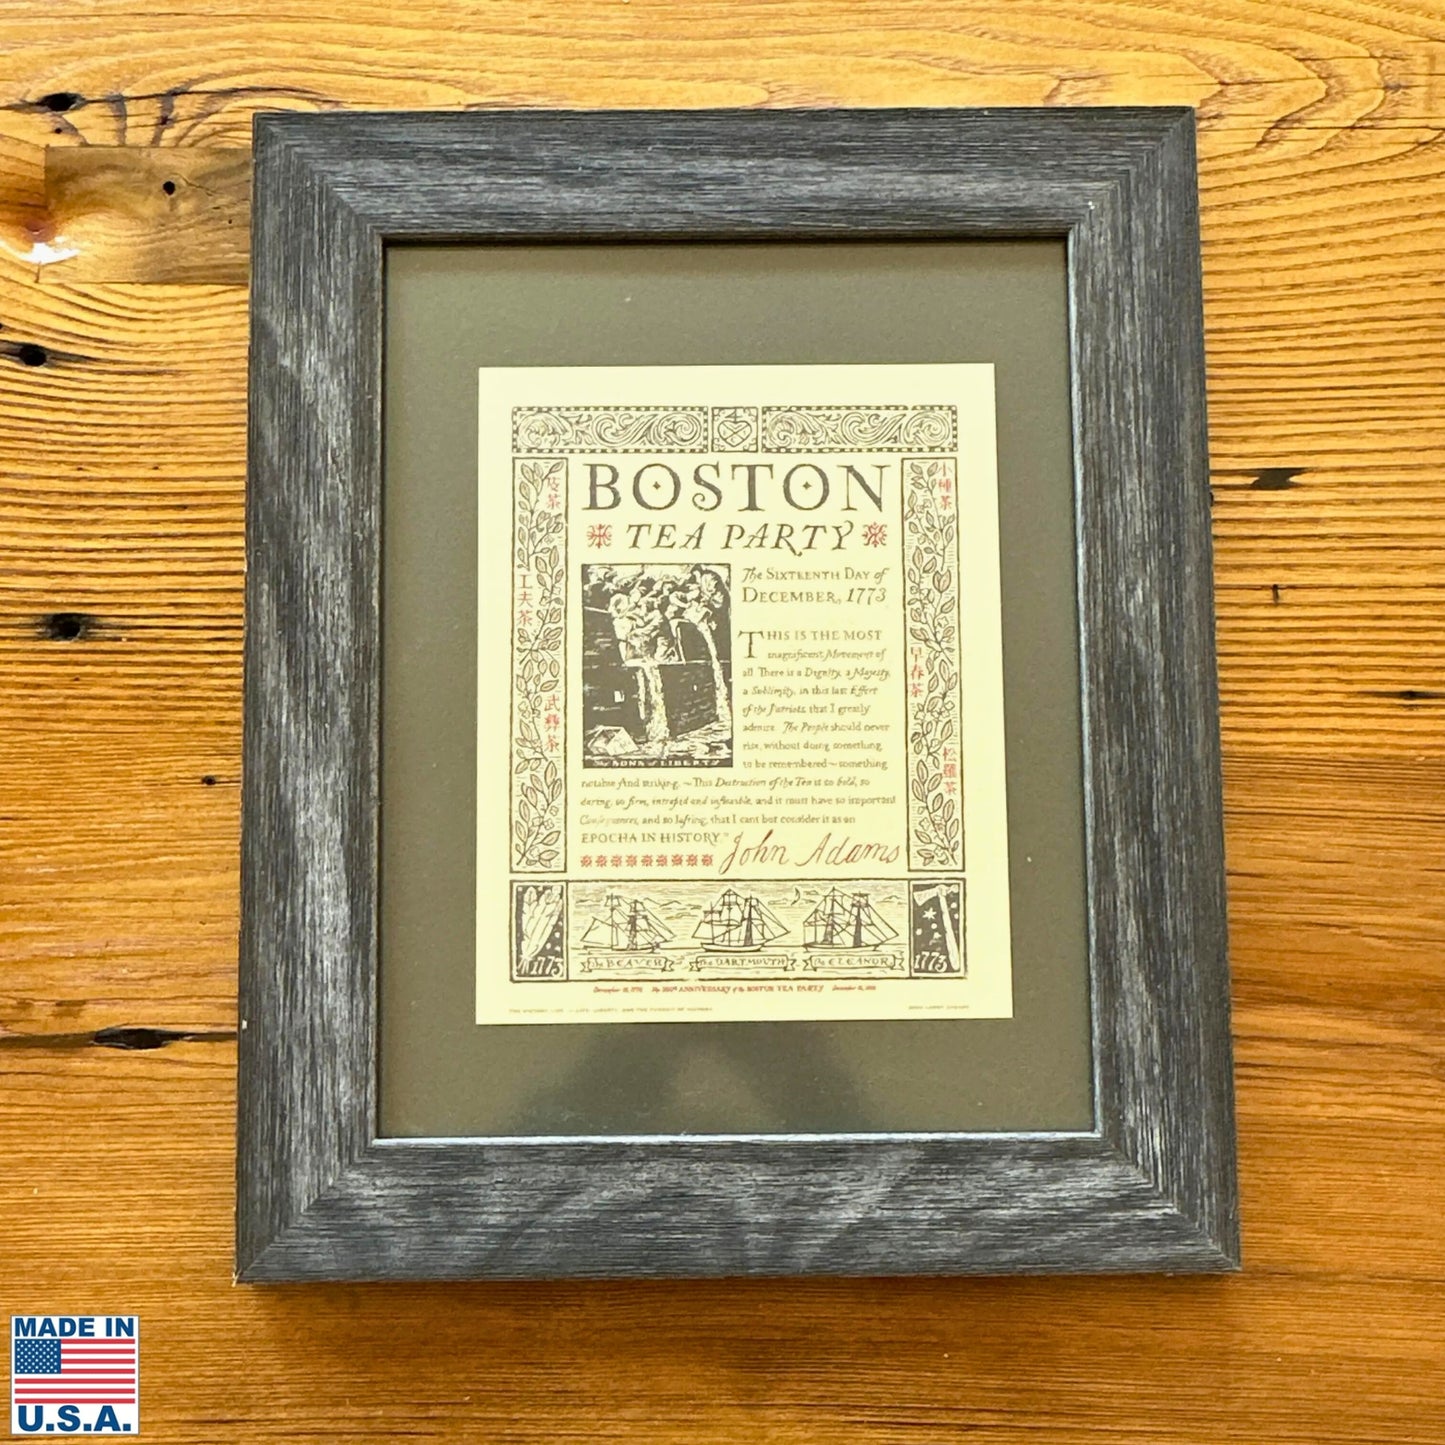 Boston Tea Party 250th Anniversary Limited edition framed print